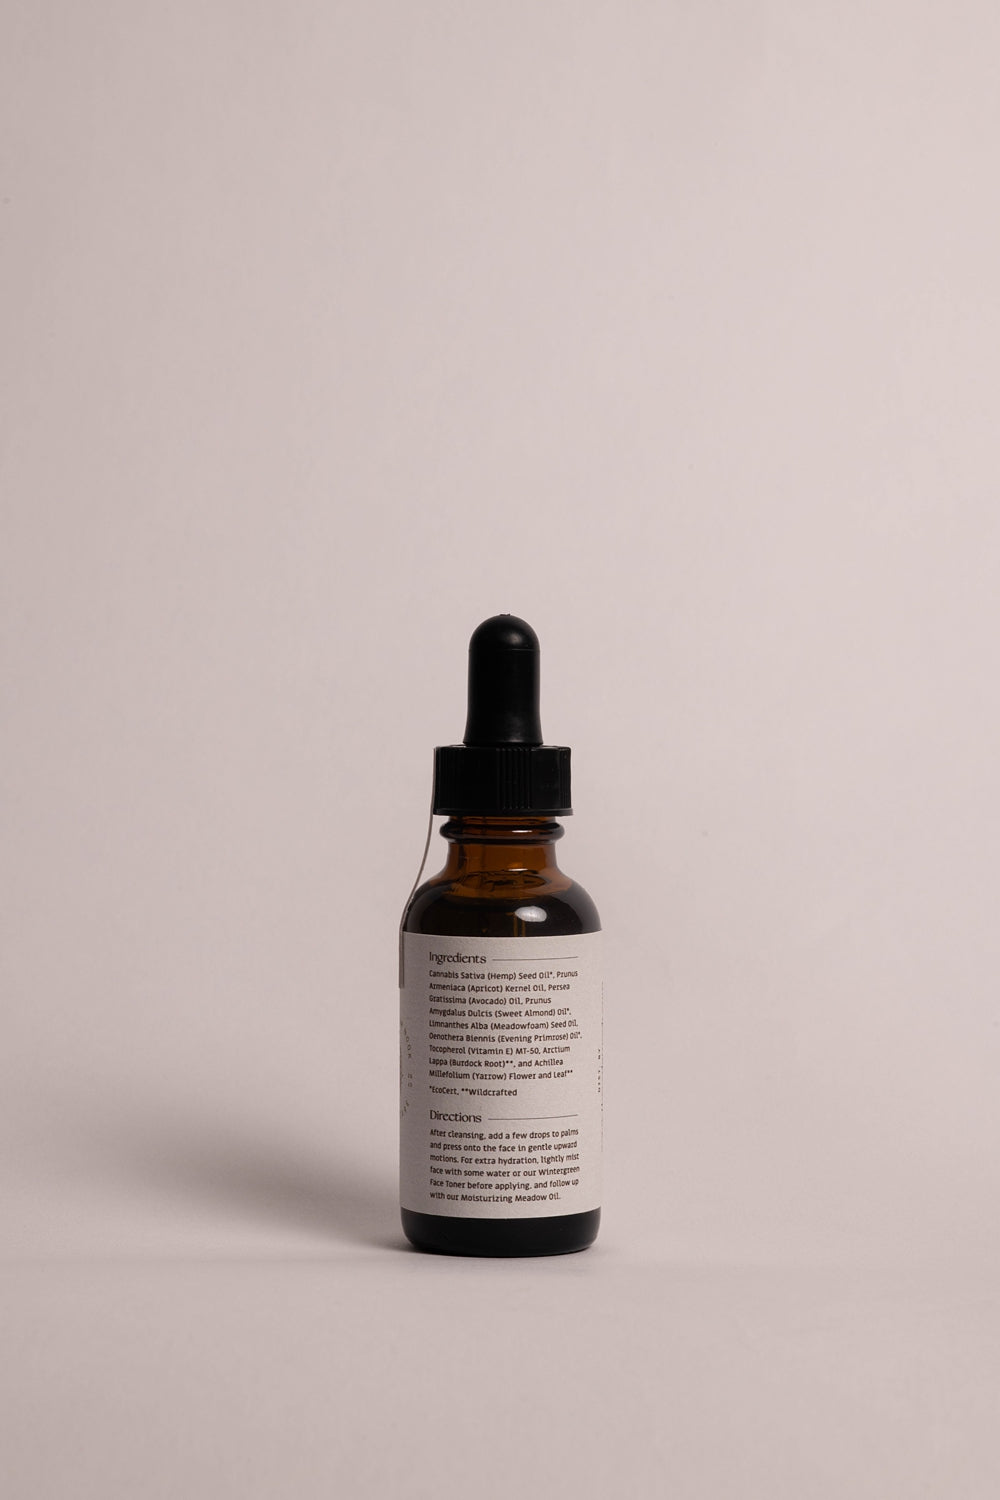 The Cedar Nook | Yarrow Face Serum for dry and sensitive skin in a 1 oz amber glass bottle with dropper, back view showing list of ingredients and directions